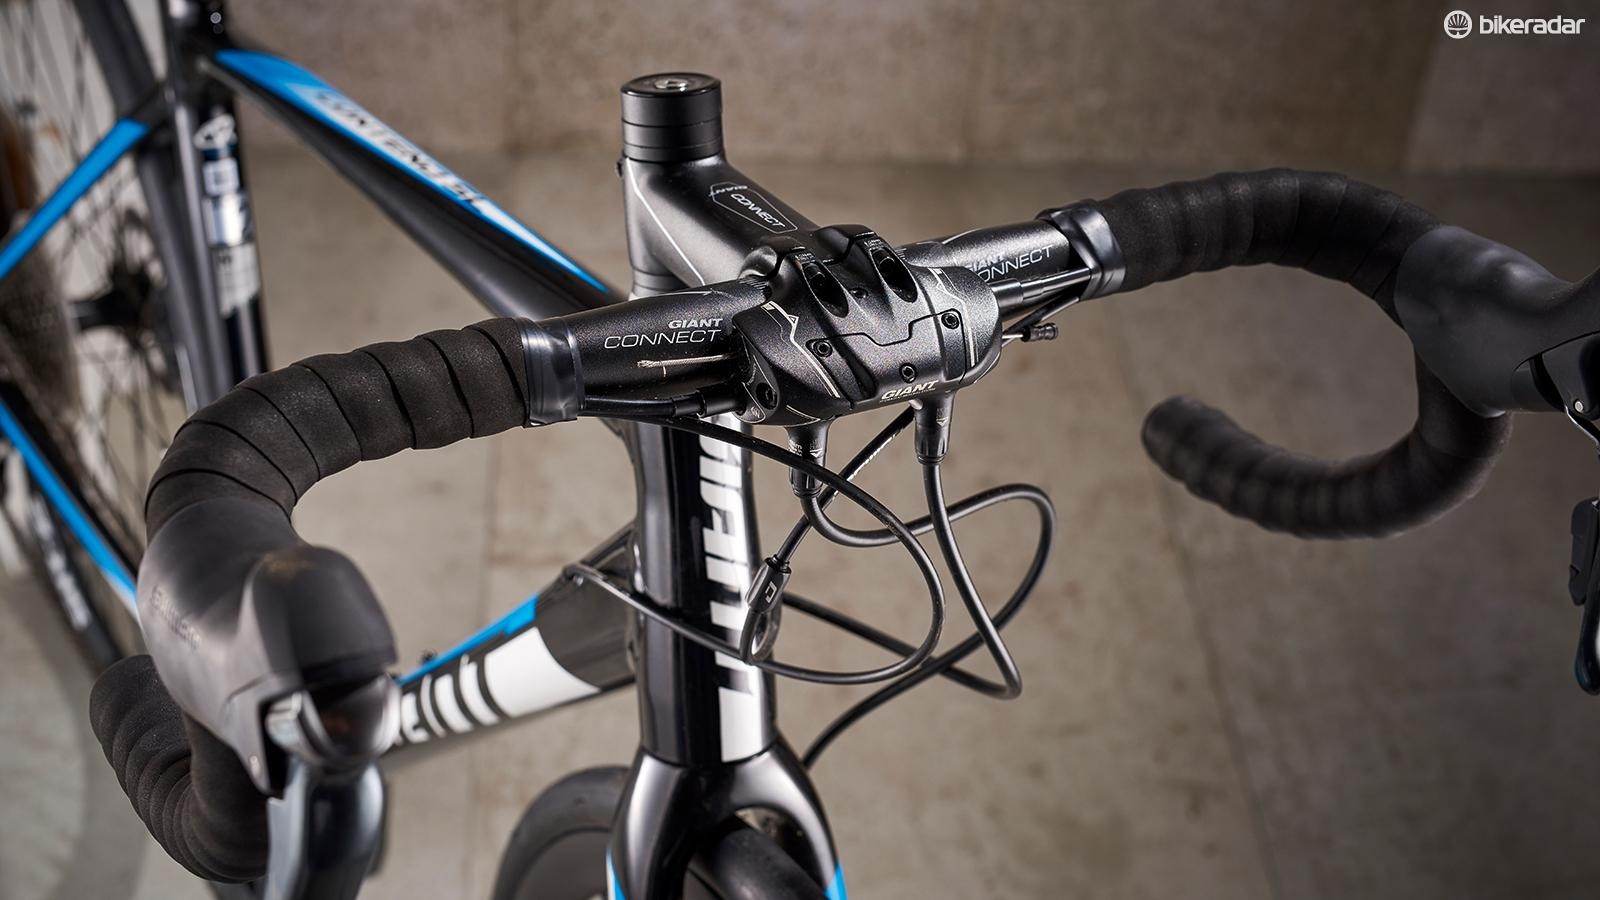 Giant Conduct Hydraulic Disc Brakes